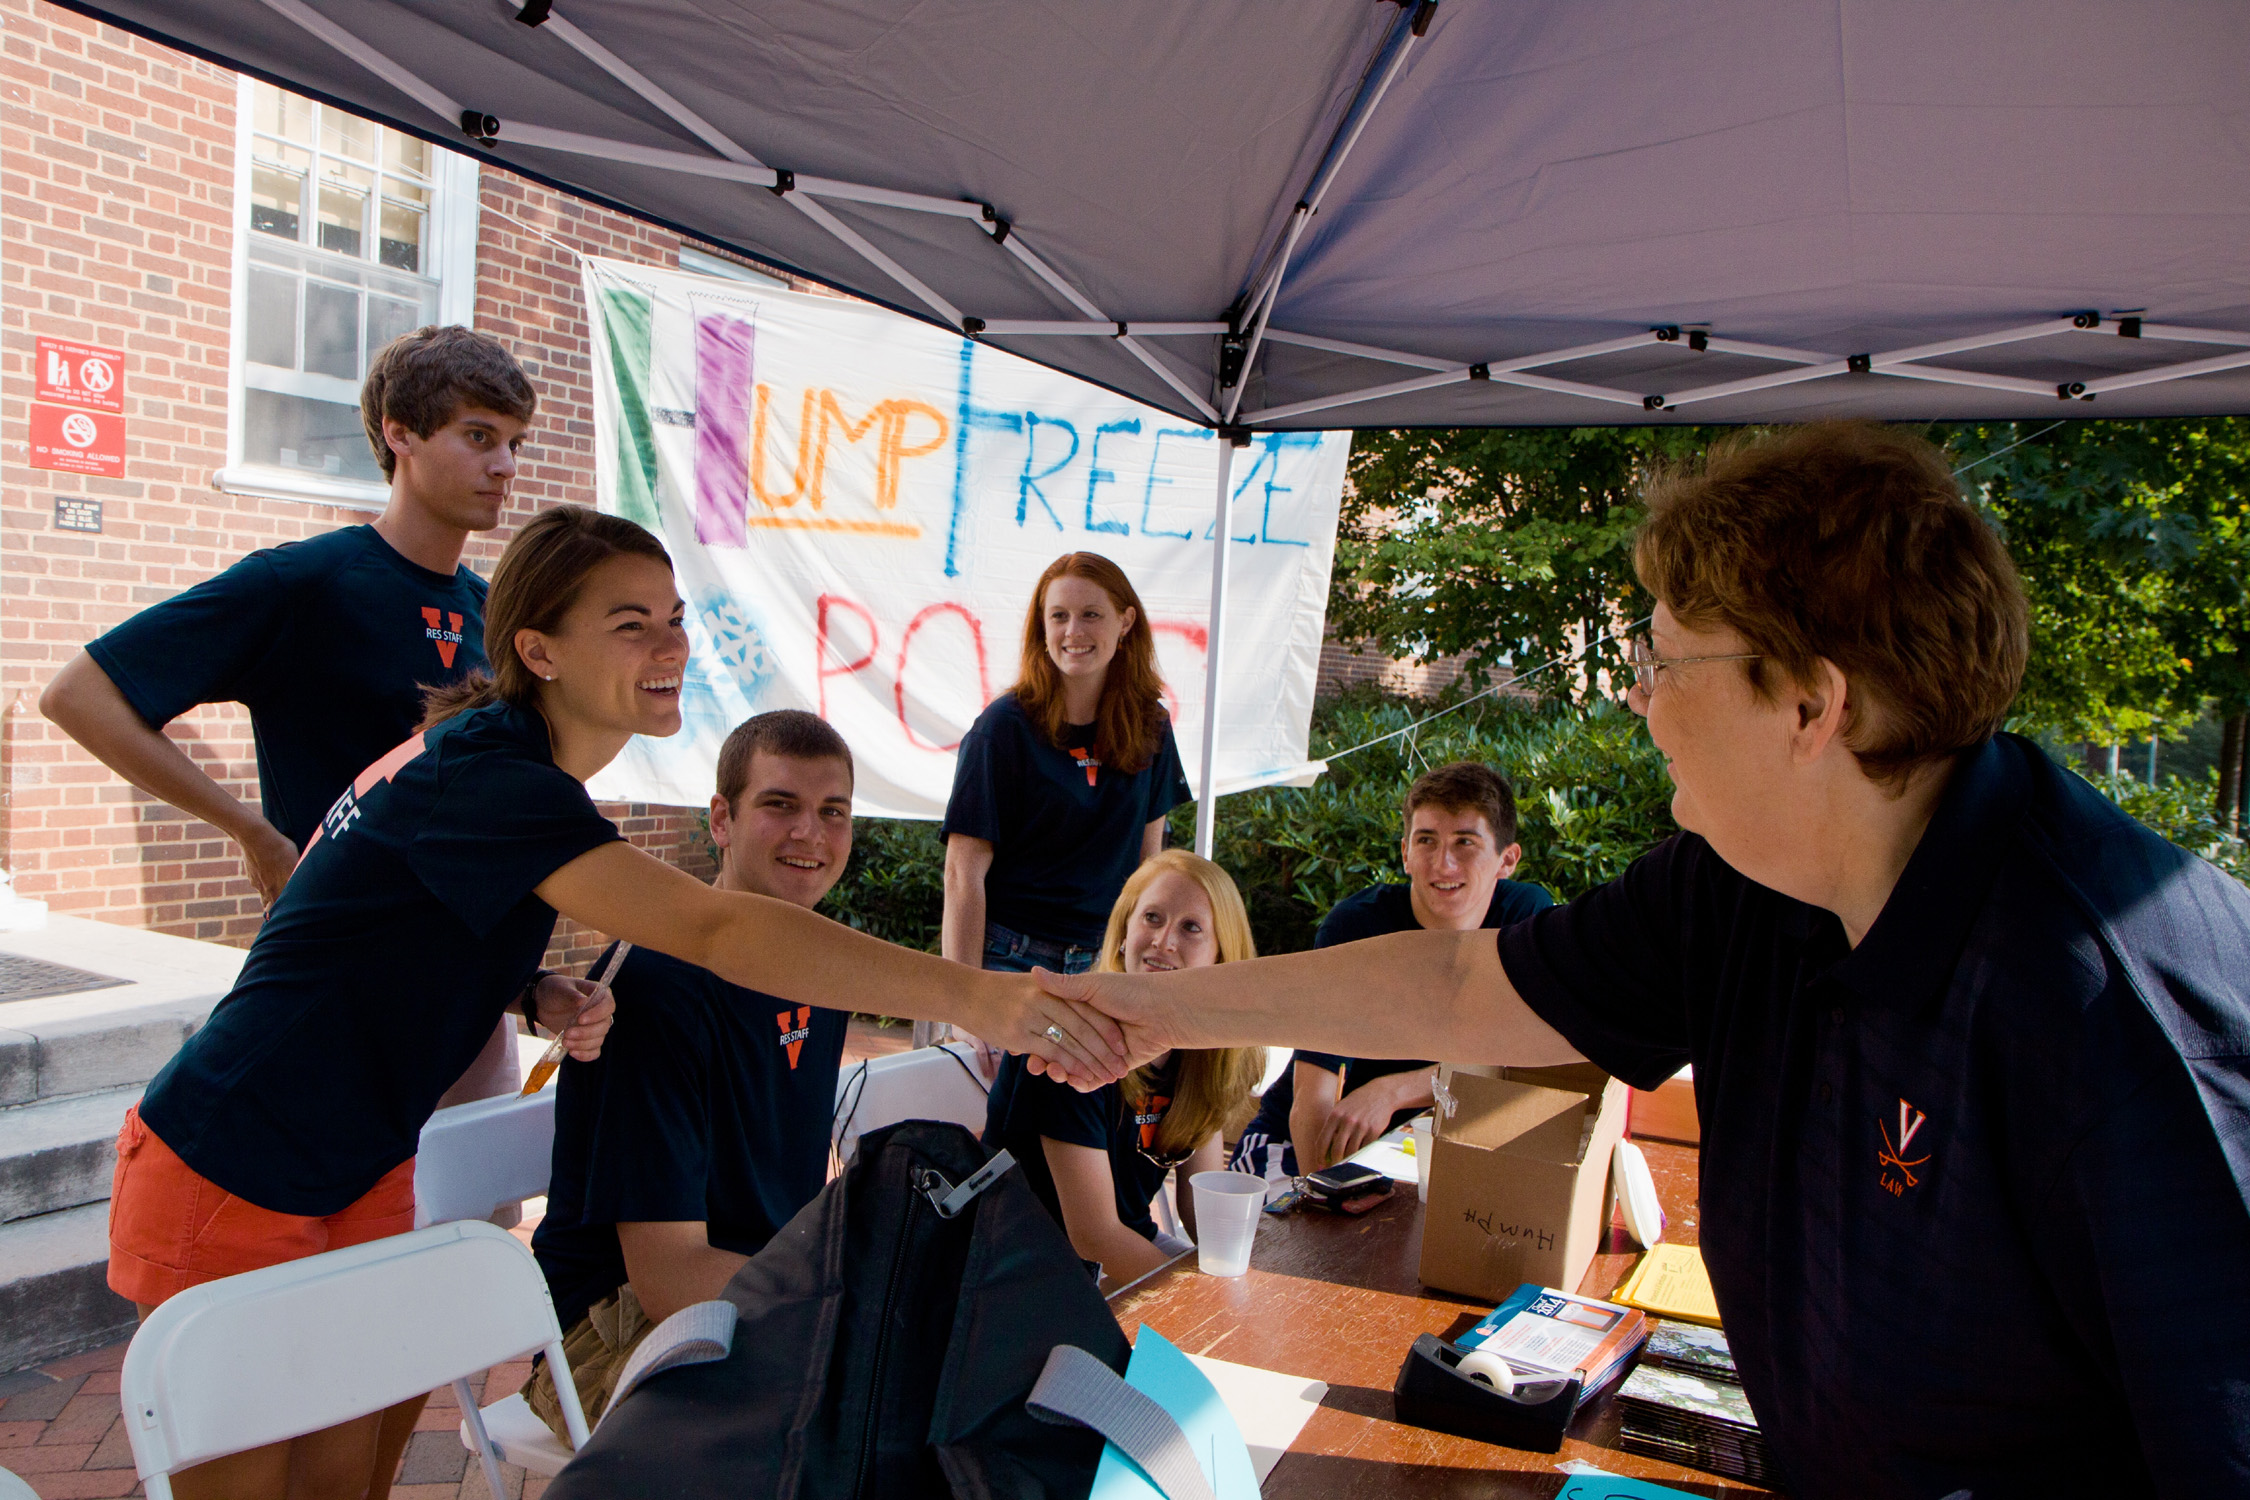 President Sullivan greets students at the greeter table in front of a dorm